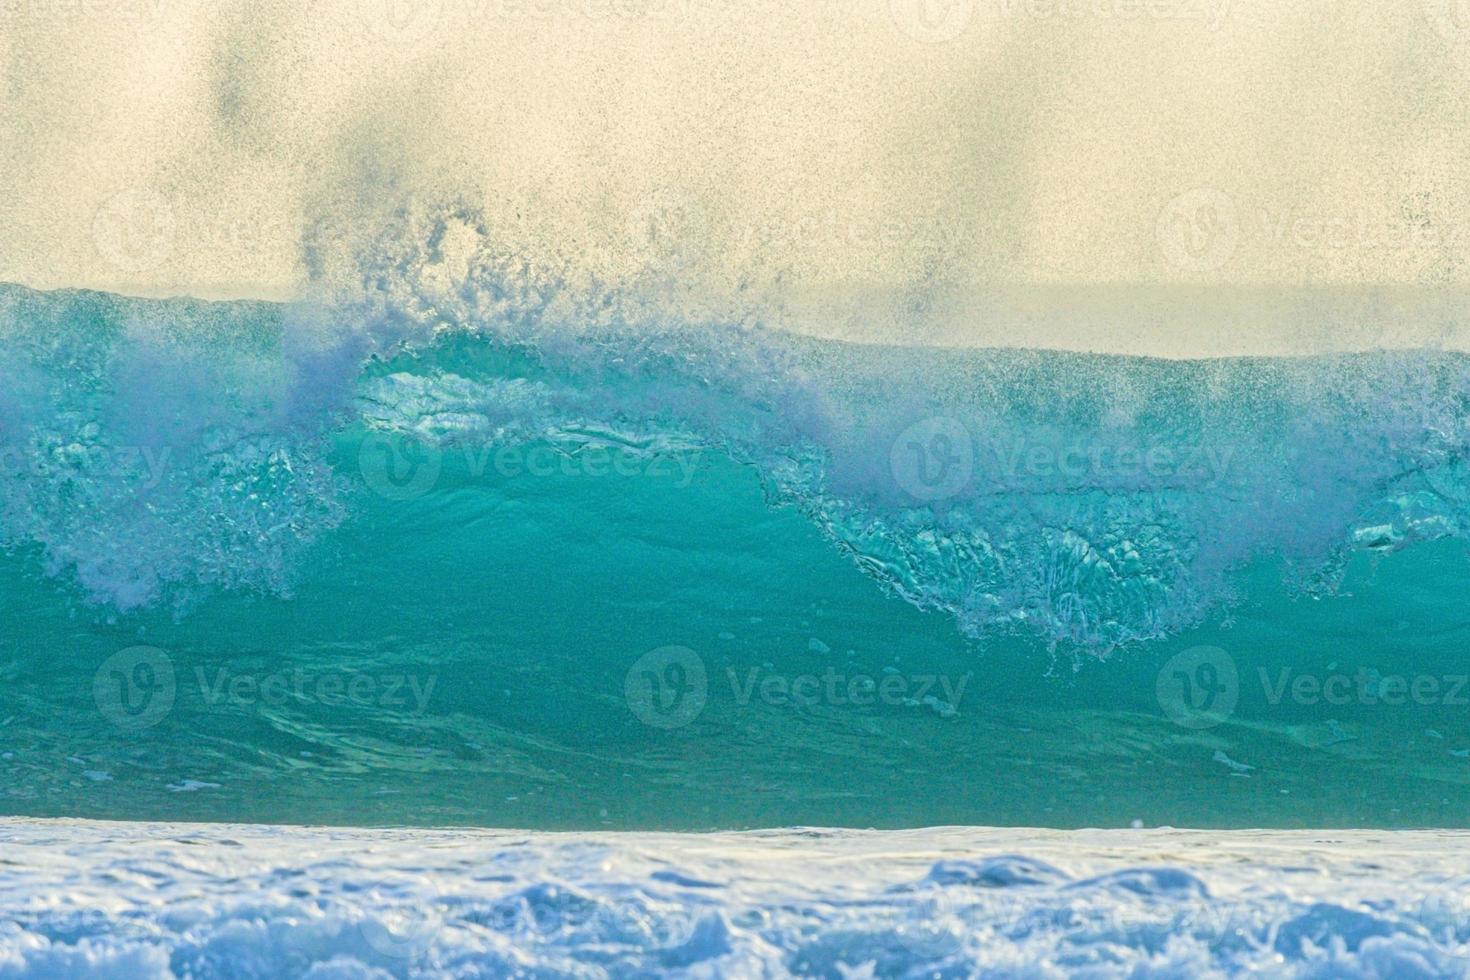 Image of wave breaking on the beach with flying spray and turquoise color photo